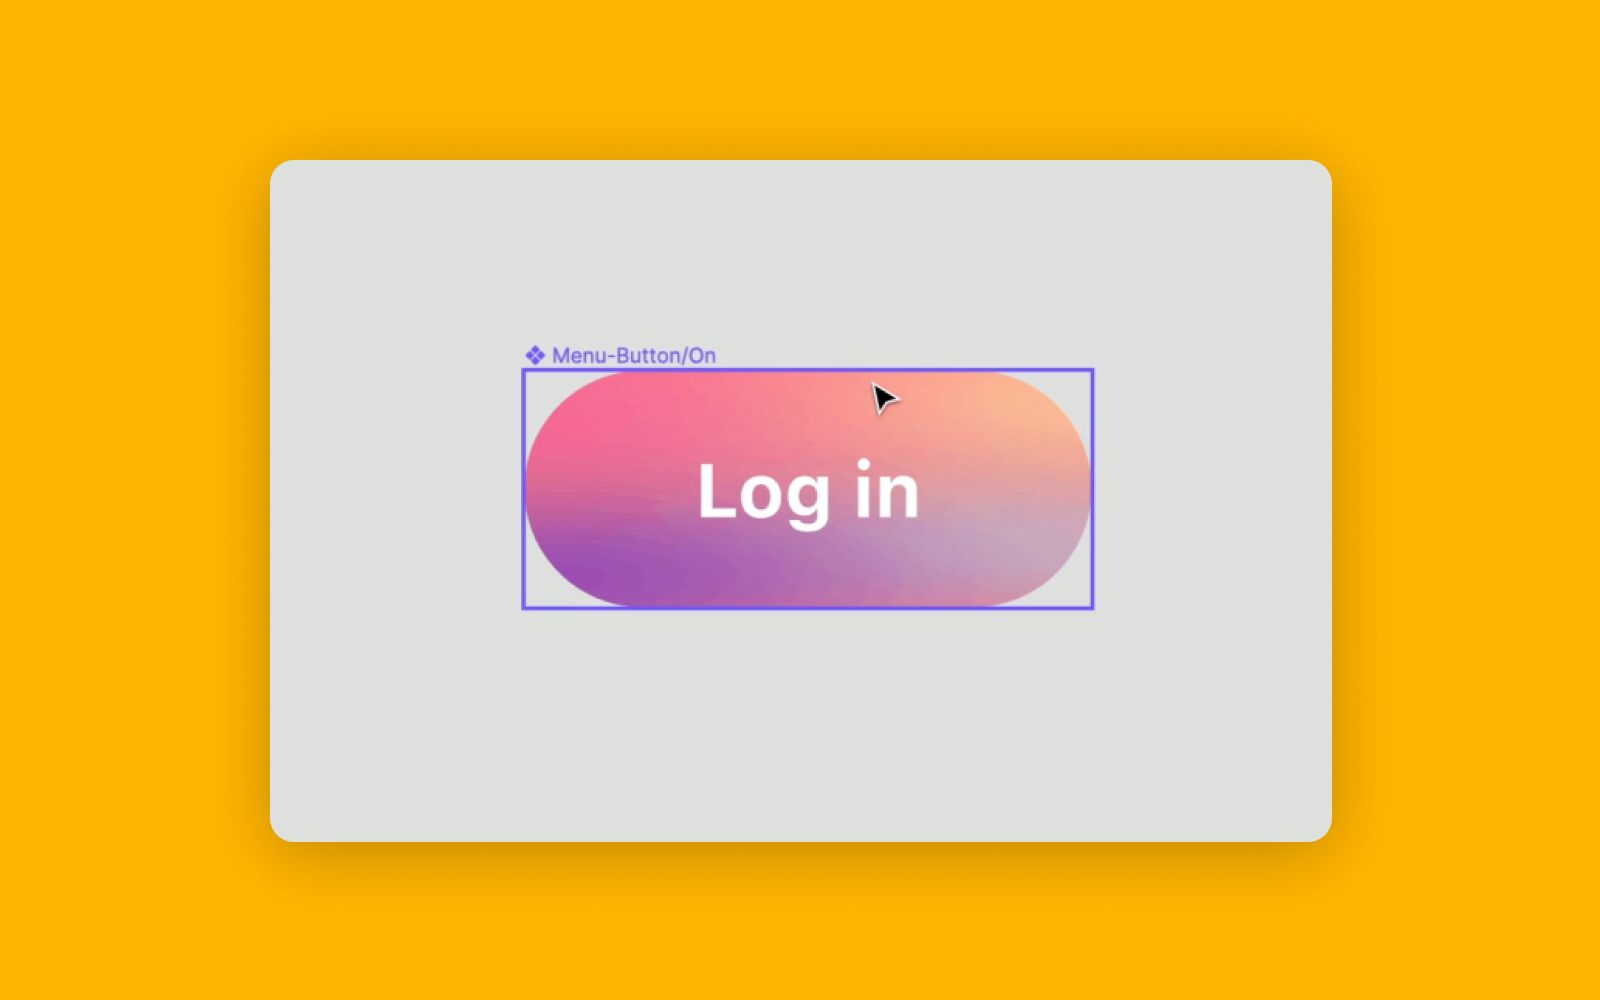 Create the hover animation for the login button